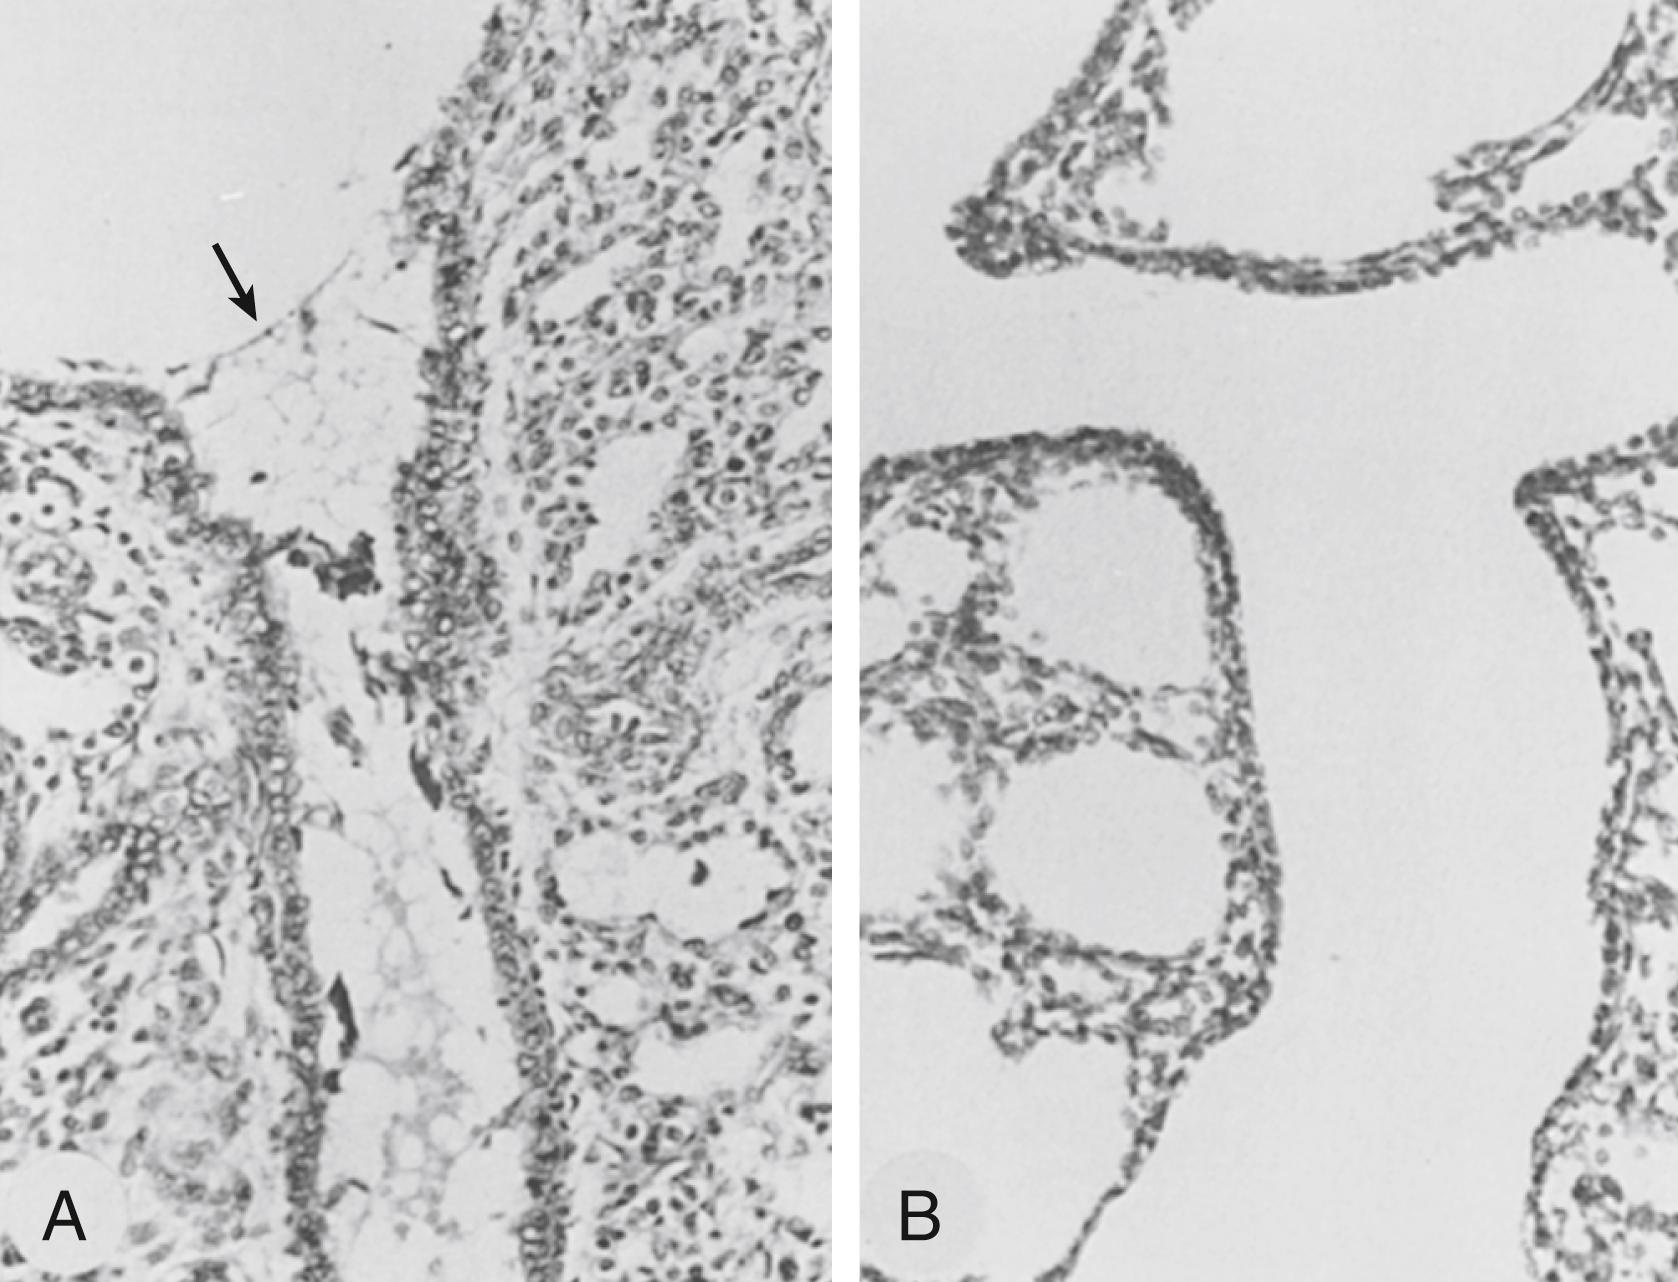 Fig. 157.7, Bronchiolar-epithelial injury in respiratory distress syndrome. (A) Lungs from preterm ventilated rabbits had fluid-filled airways with epithelial tears in the absence of surfactant treatment. Arrow indicates air fluid interface in small airway . (B) With surfactant treatments, the bronchiolar epithelium remained intact, and fluid was cleared from the airways and alveoli.